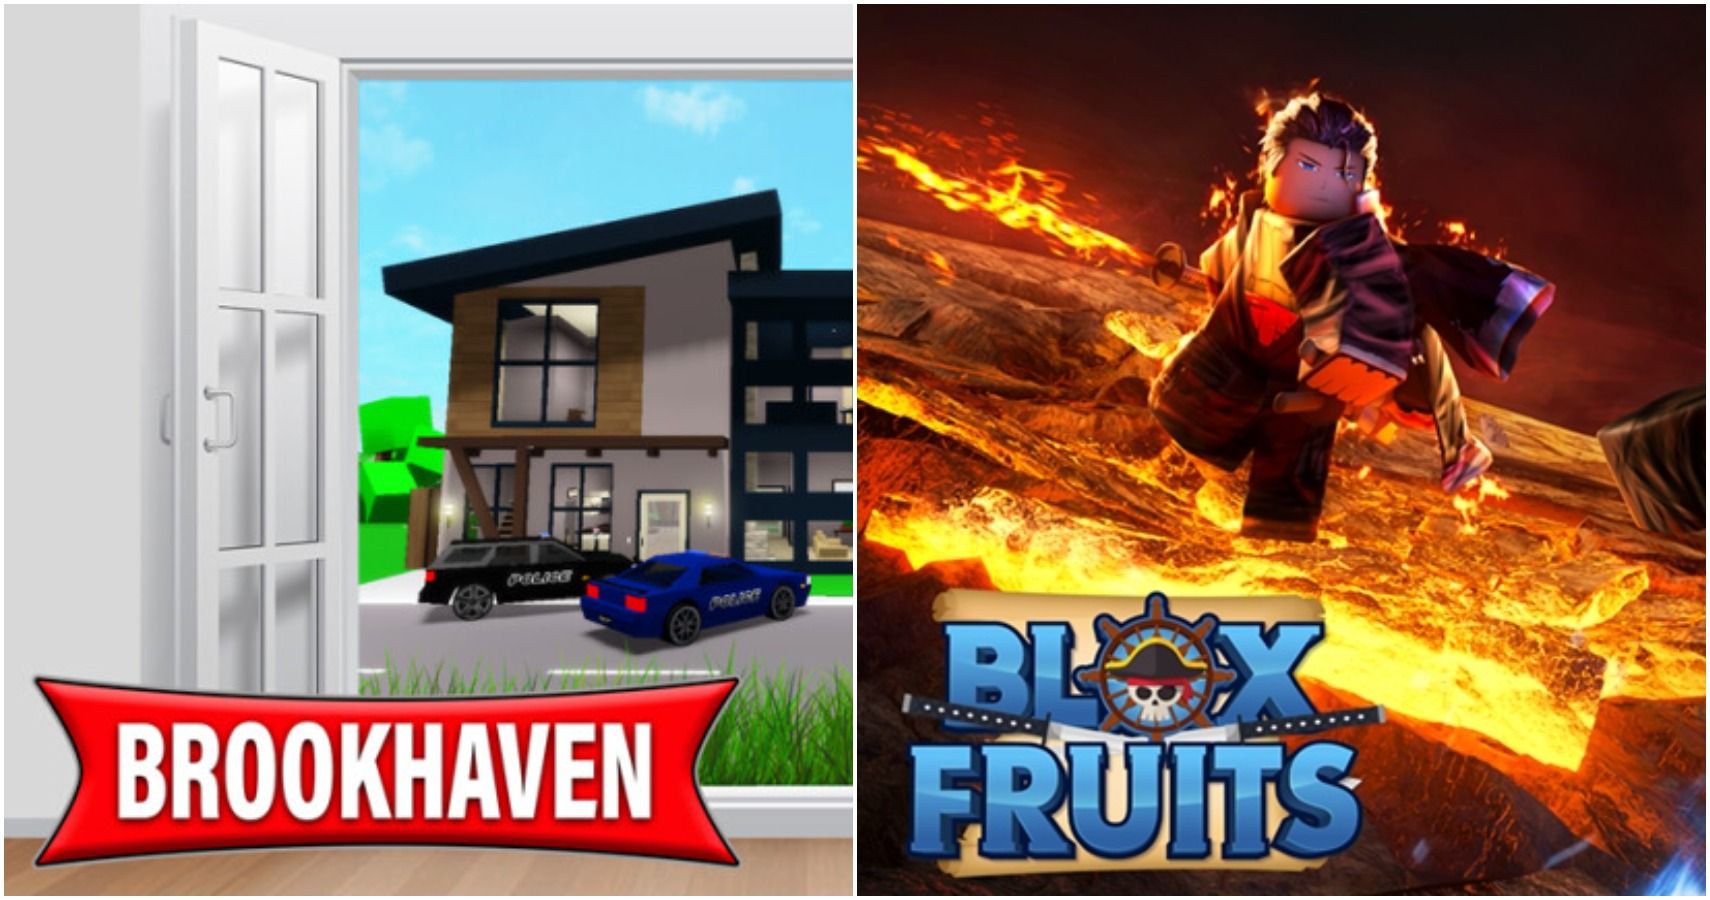 brookhaven and blox fruits images from roblox